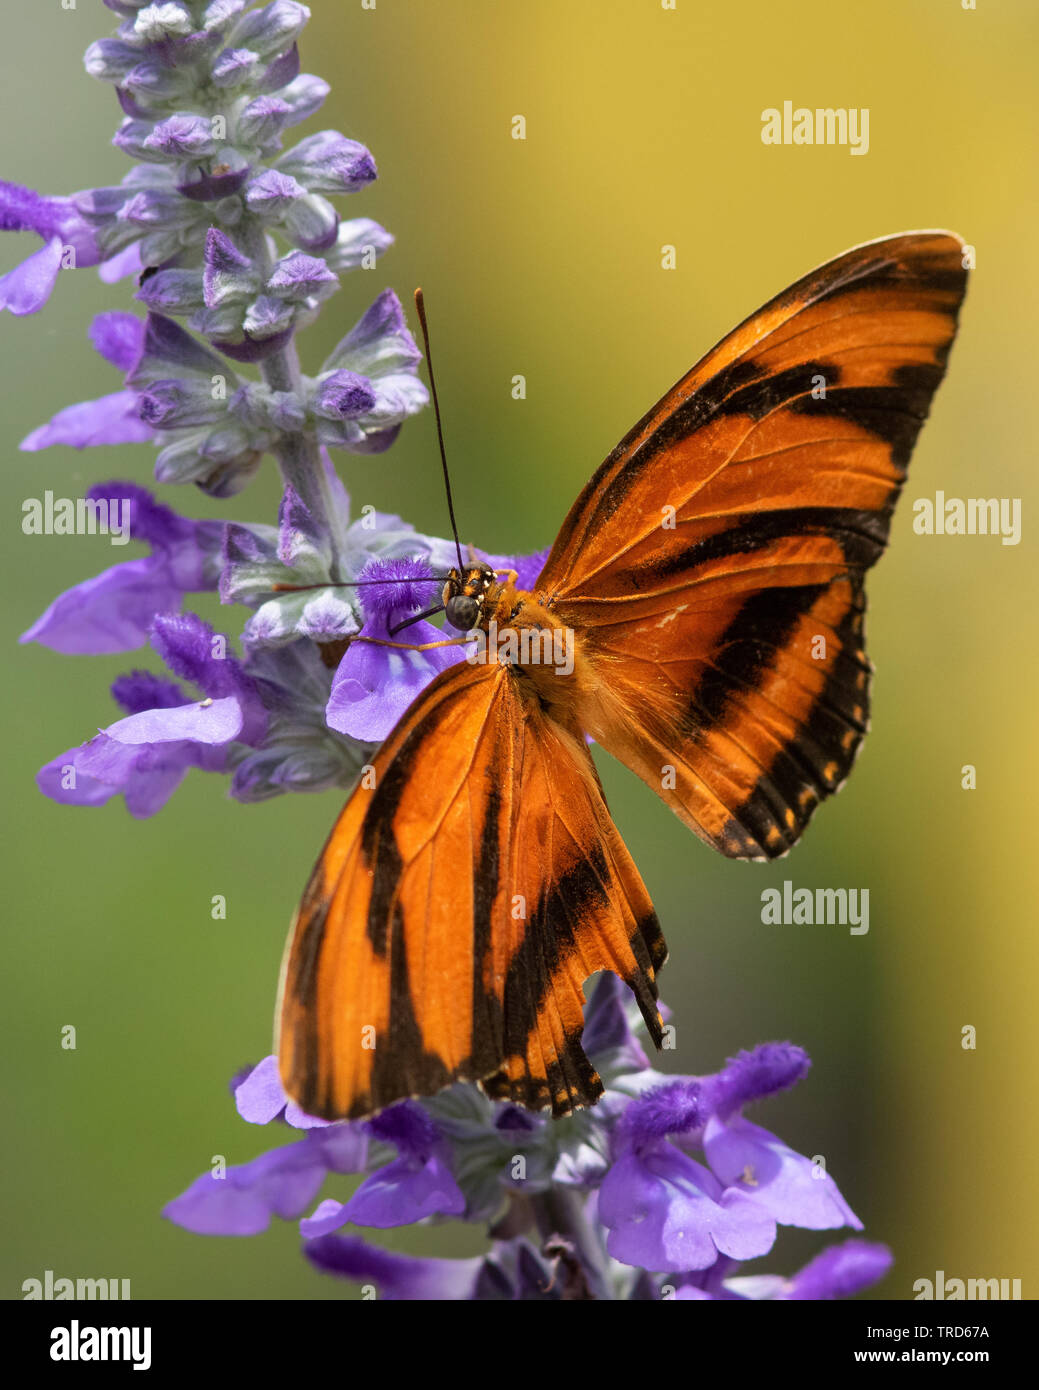 A banded orange heliconian gathering nectar from a flower Stock Photo